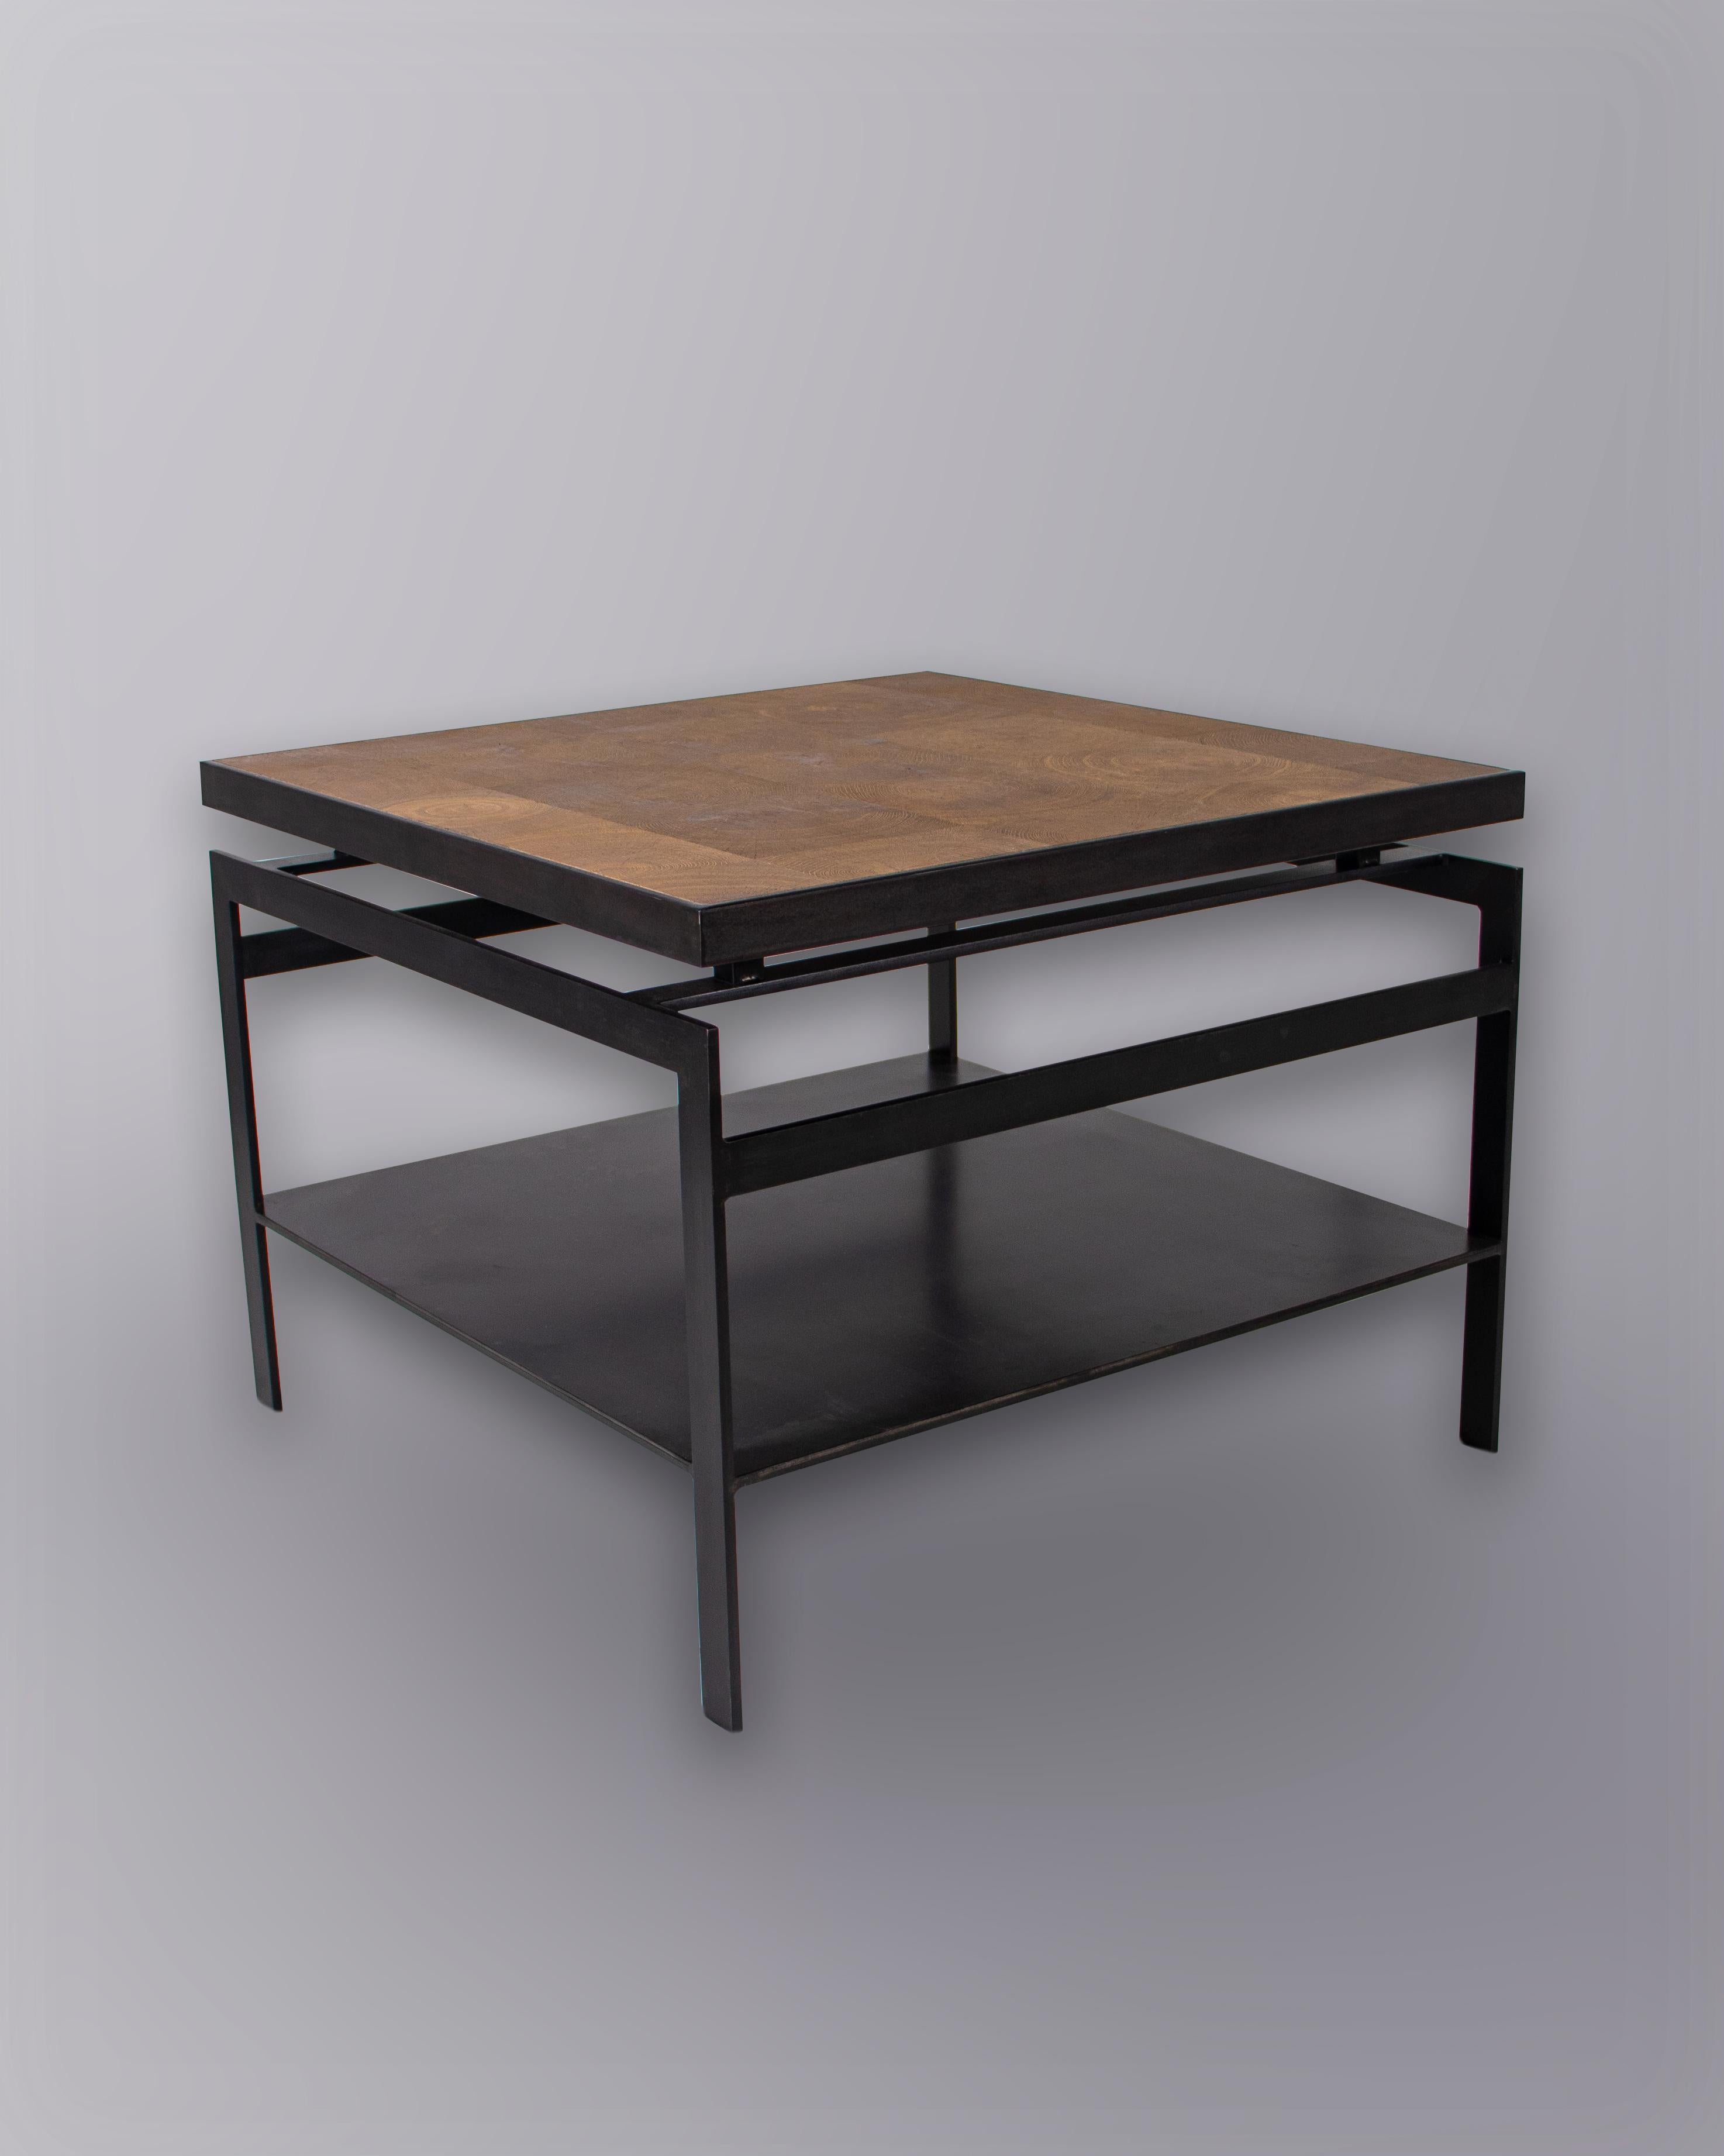 Minimalist end table made from solid black steel with natural oak top.

Designed by Brendan Bass for the Vision and Design Collection, by using high quality materials and textures. All materials are sourced from local vendors throughout the state of